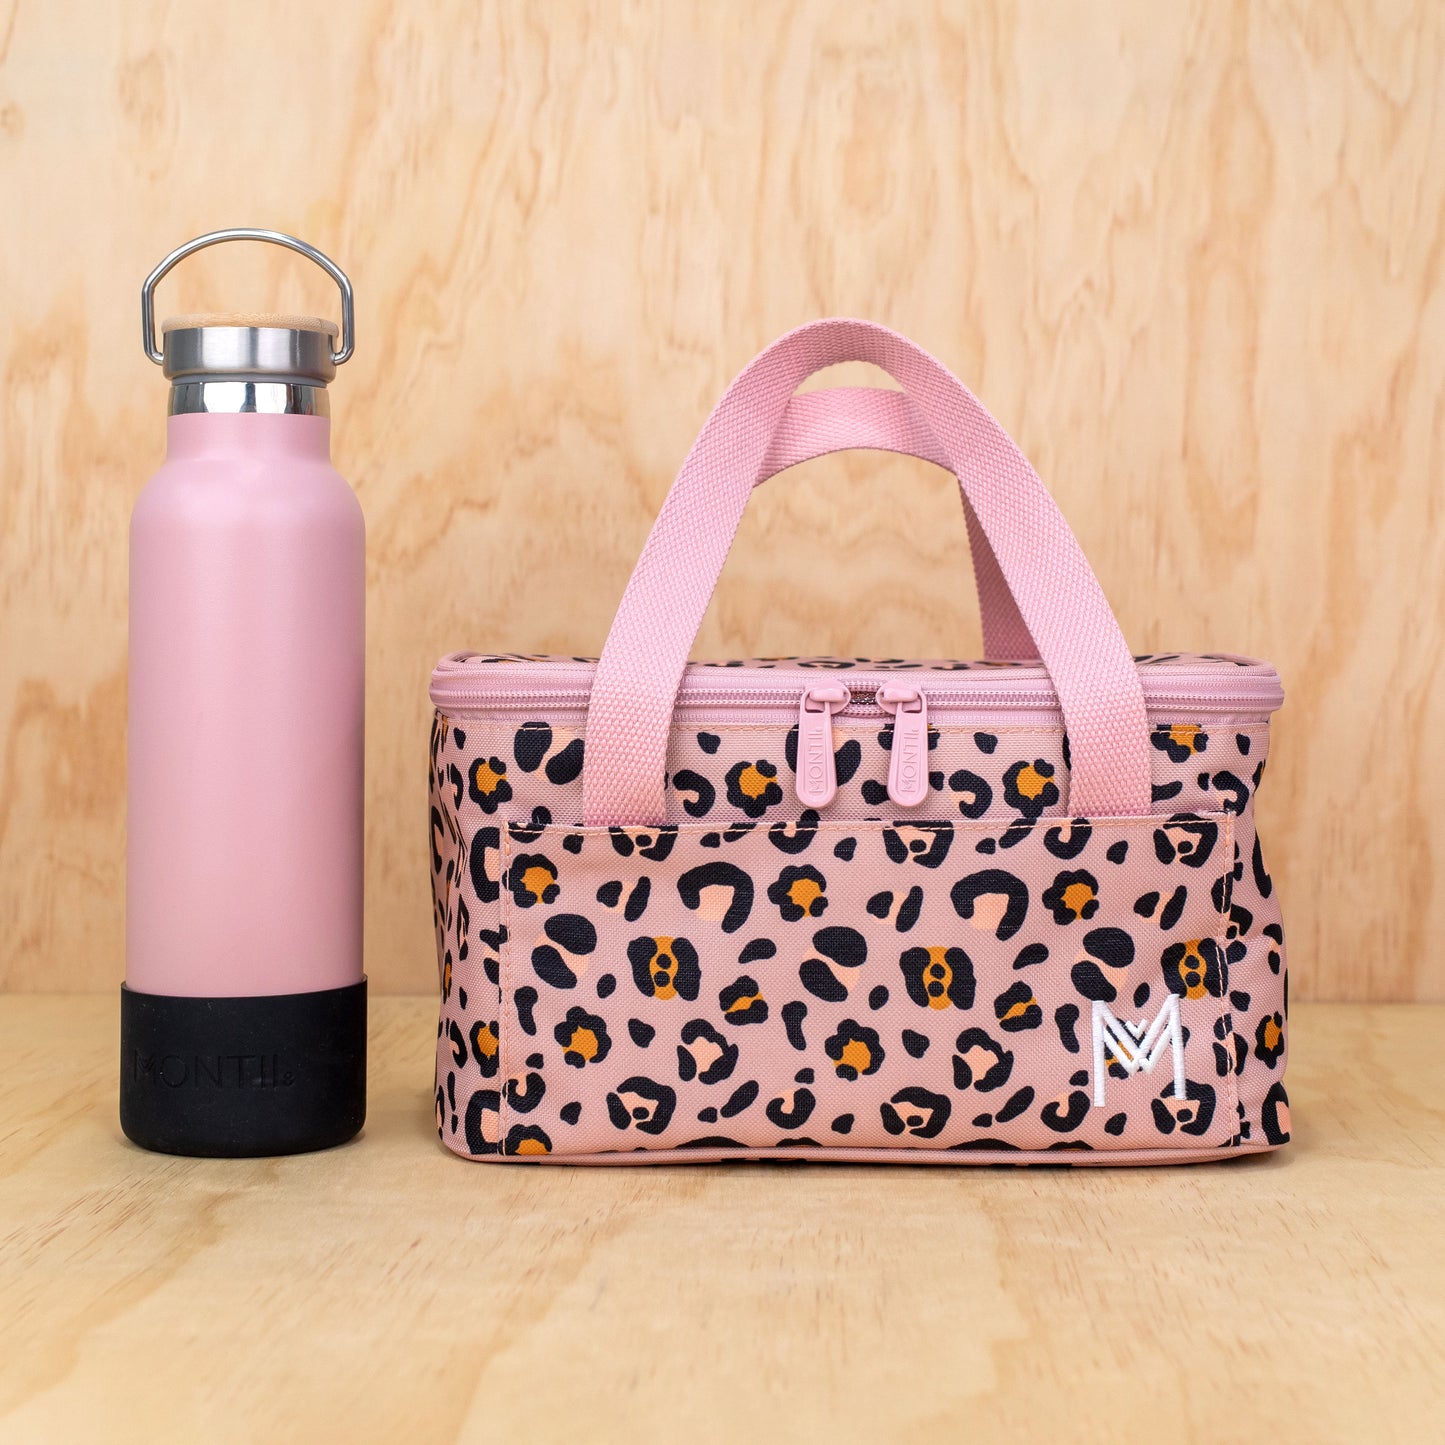 MontiiCo Insulated Cooler Bag - Blossom Leopard